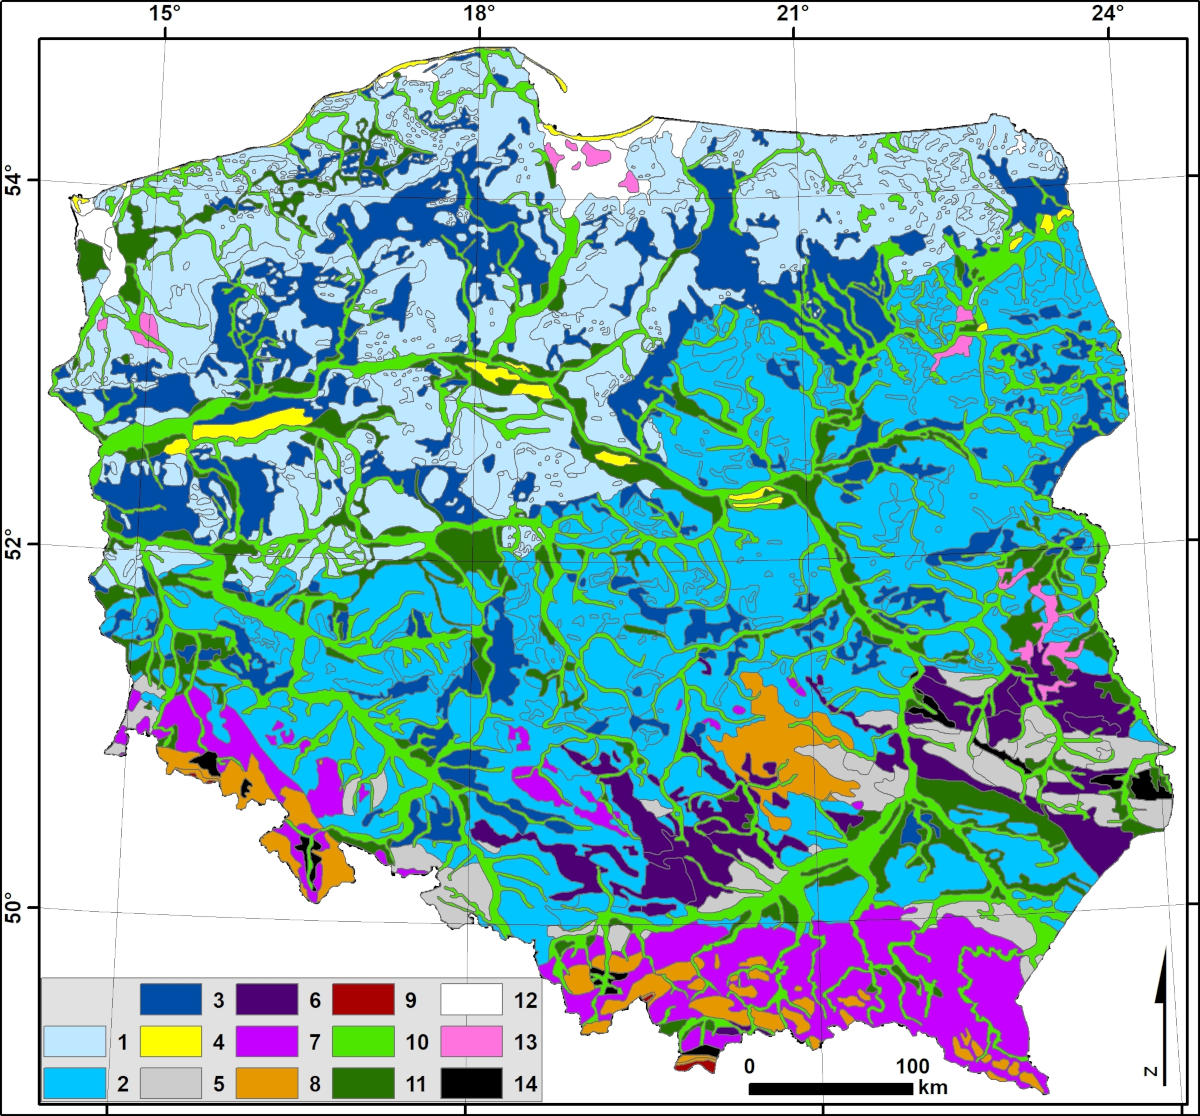 The sorts of natural landscape in Poland. Own elaboration based on Richling (2005), modified. Lowland landscapes: 1 – Glacial; 2 – Periglacial; 3 – Fluvioglacial; 4 – Aeolian; Upland and low mountain landscapes: 5 – Loess - Aeolian; 6 – Carbonate and gypsum – erosional; 7 – Siliceous and aluminosiliceous - erosional; Mountainous landscapes: 8 – Medium mountain - erosional; 9 – High mountain – erosional and glacial; Valley and depression landscapes: 10 – Inundated valley floors - accumulated; 11 – Supra-inundated terraces – accumulated; 12 – Deltaic – accumulated; 13 – Swampy plains – accumulated 14 – Intermontane basins – erosional.